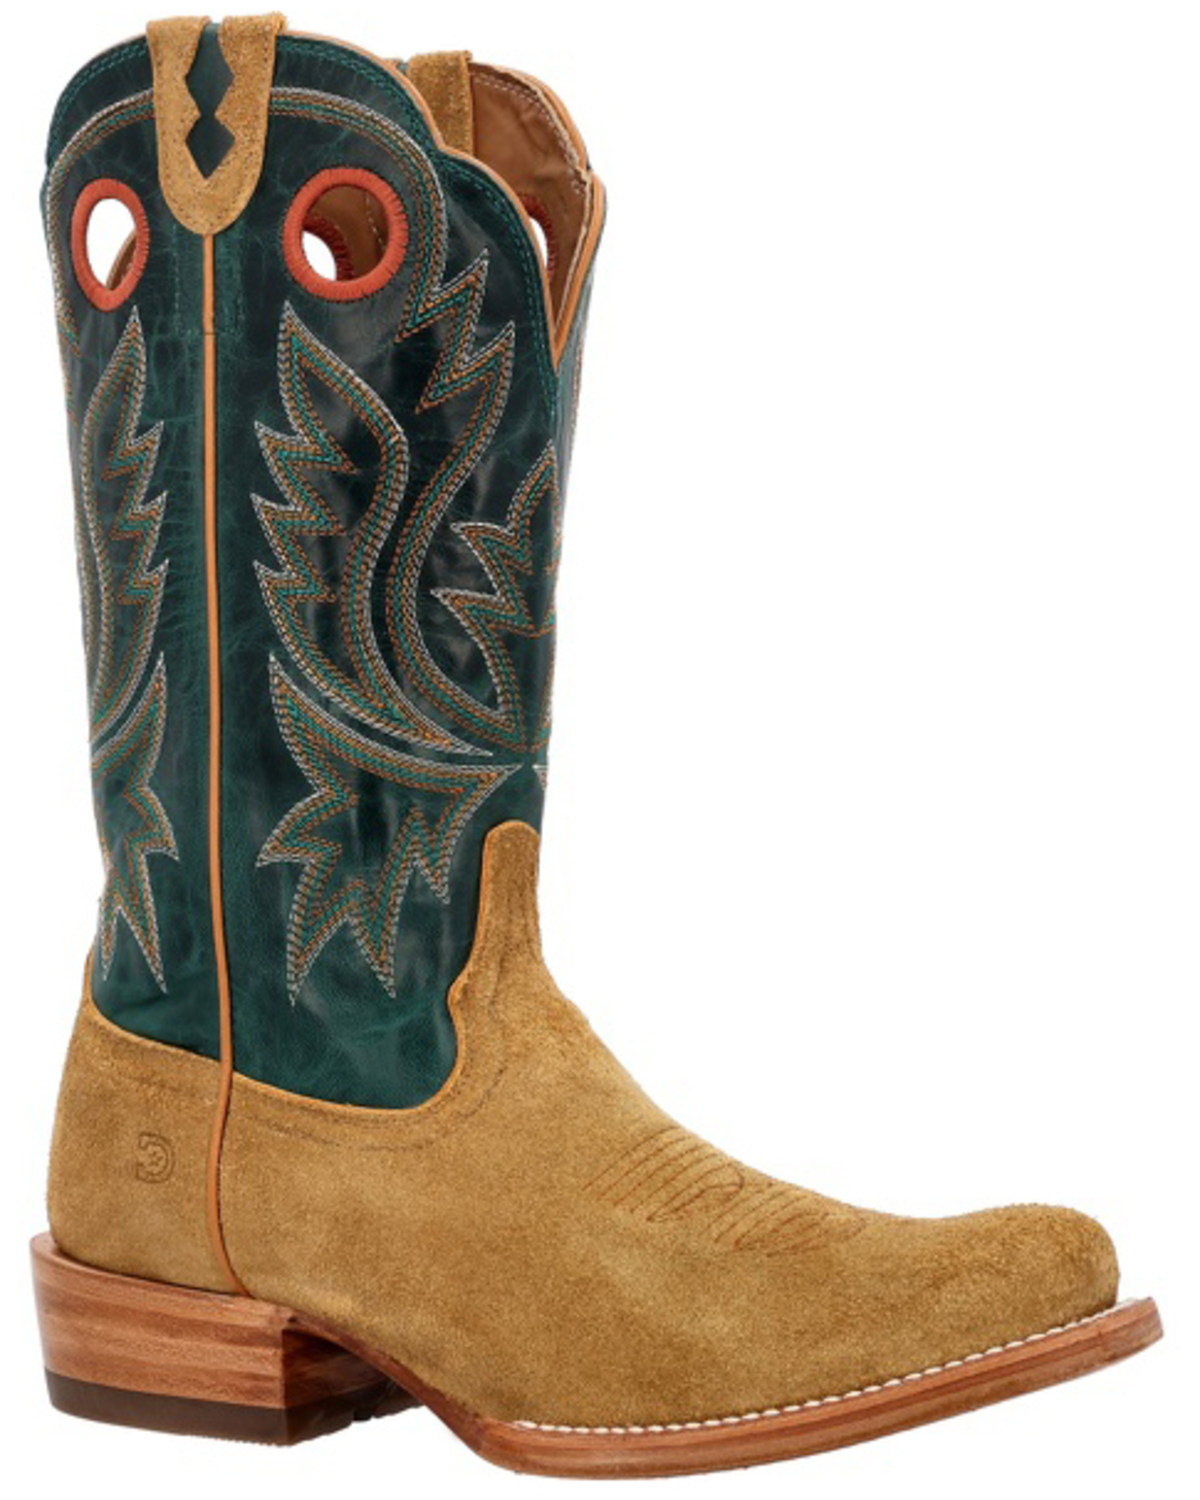 Durango Men's PRCA Collection Roughout Western Boots - Square Toe